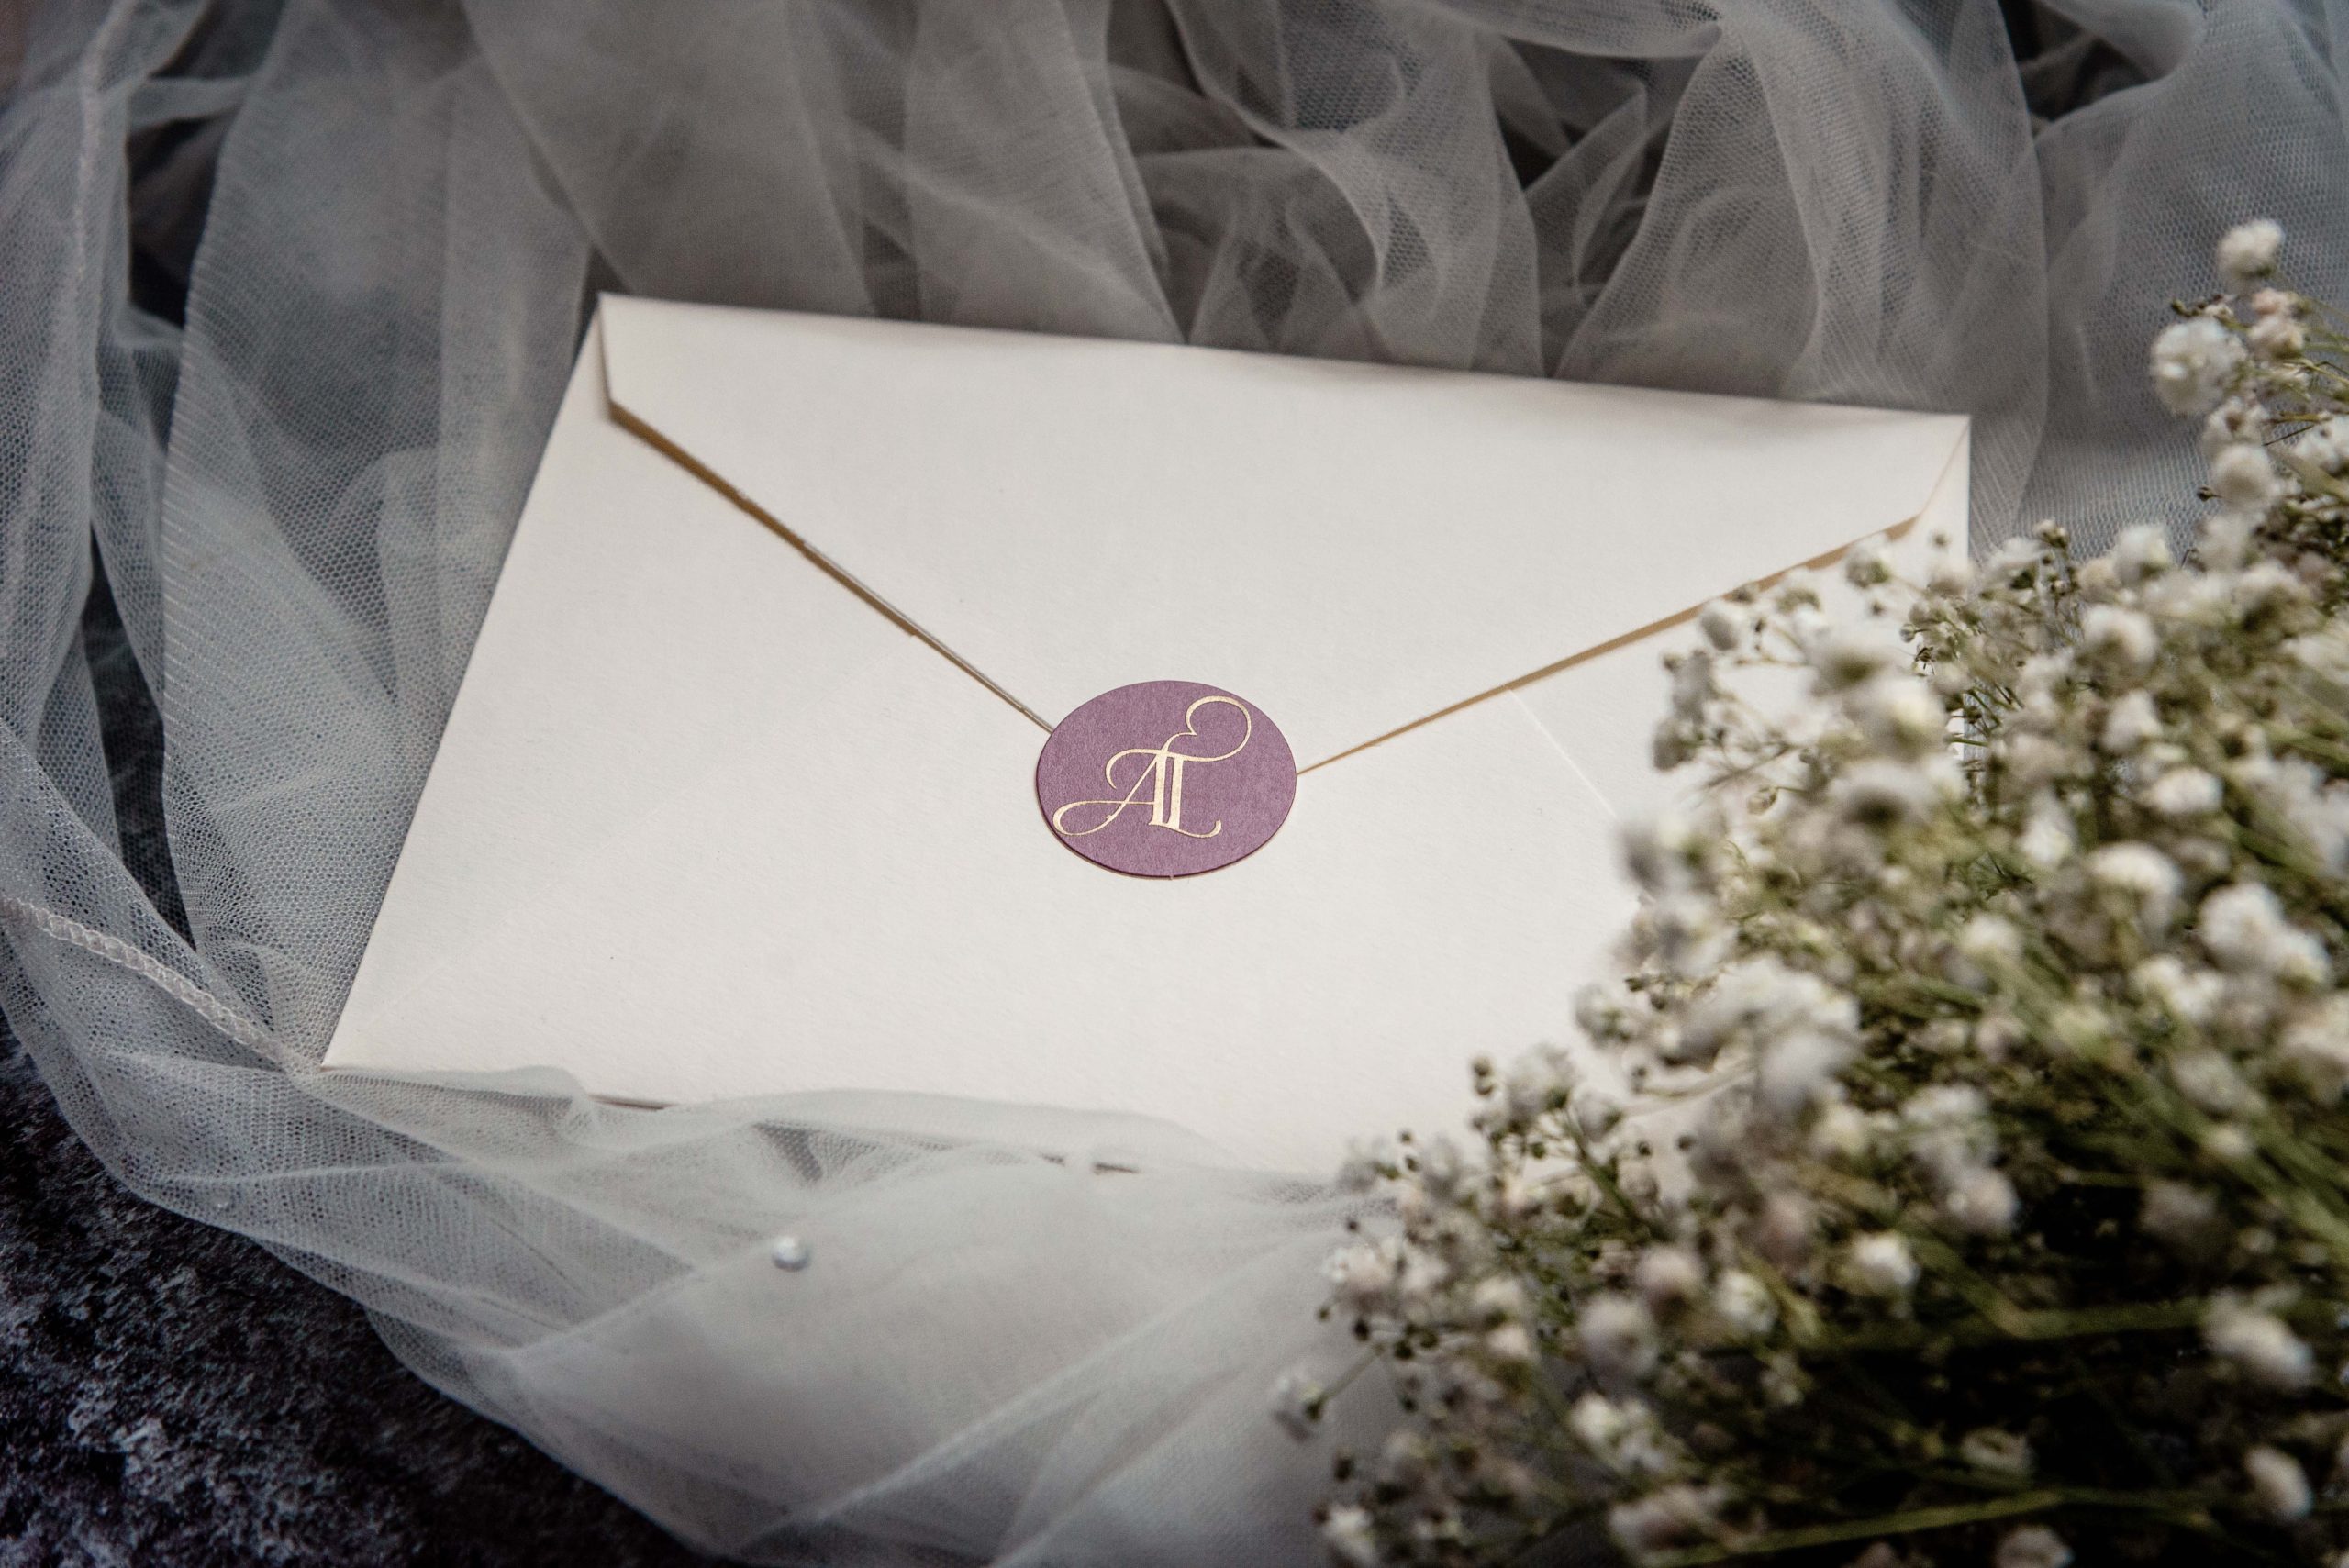 Monograms on Wedding Stationery  The Ultimate Guide by Vaishali